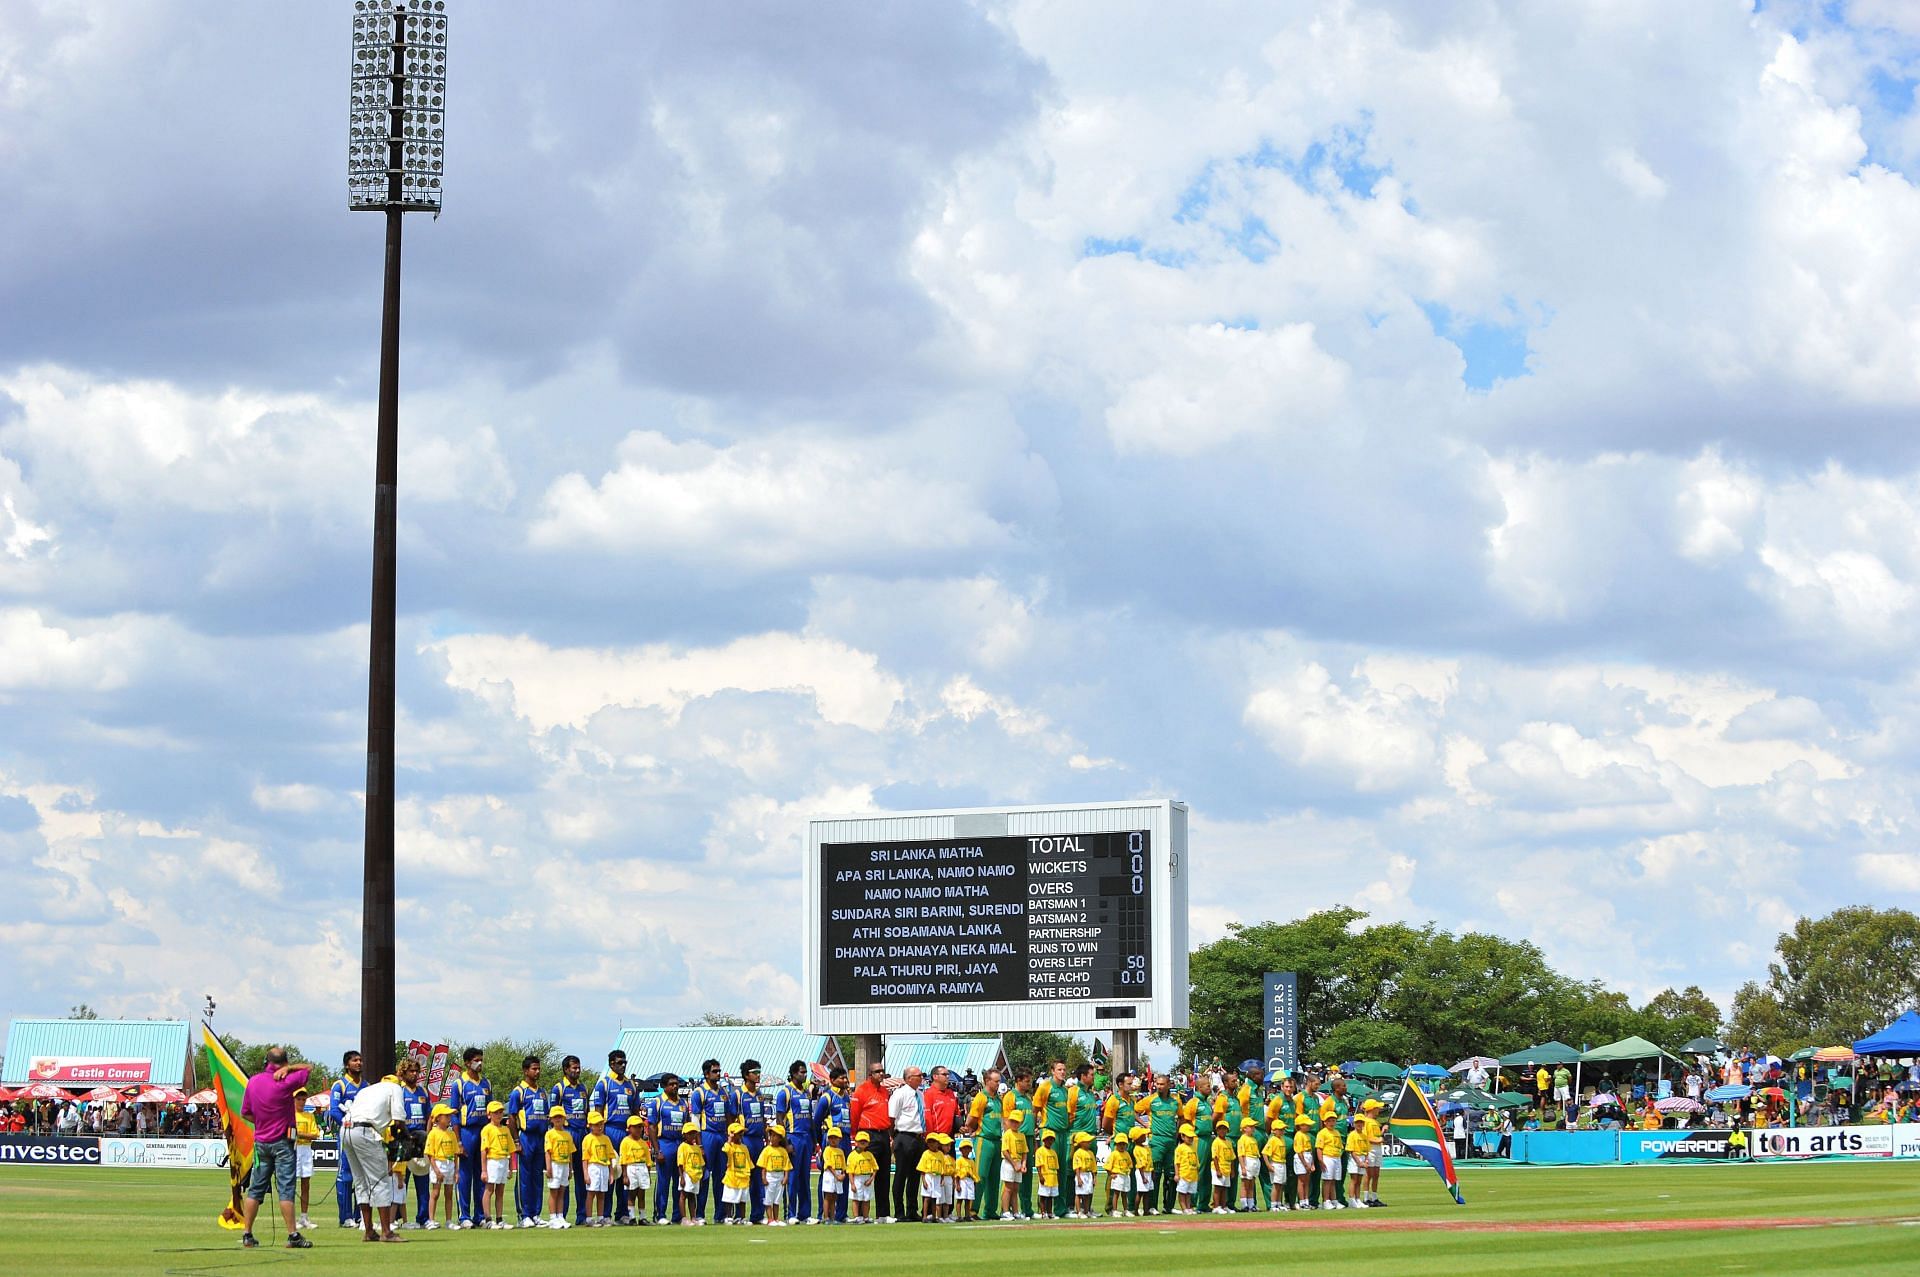 The Diamond Oval in Kimberley will be hosting this quarter final